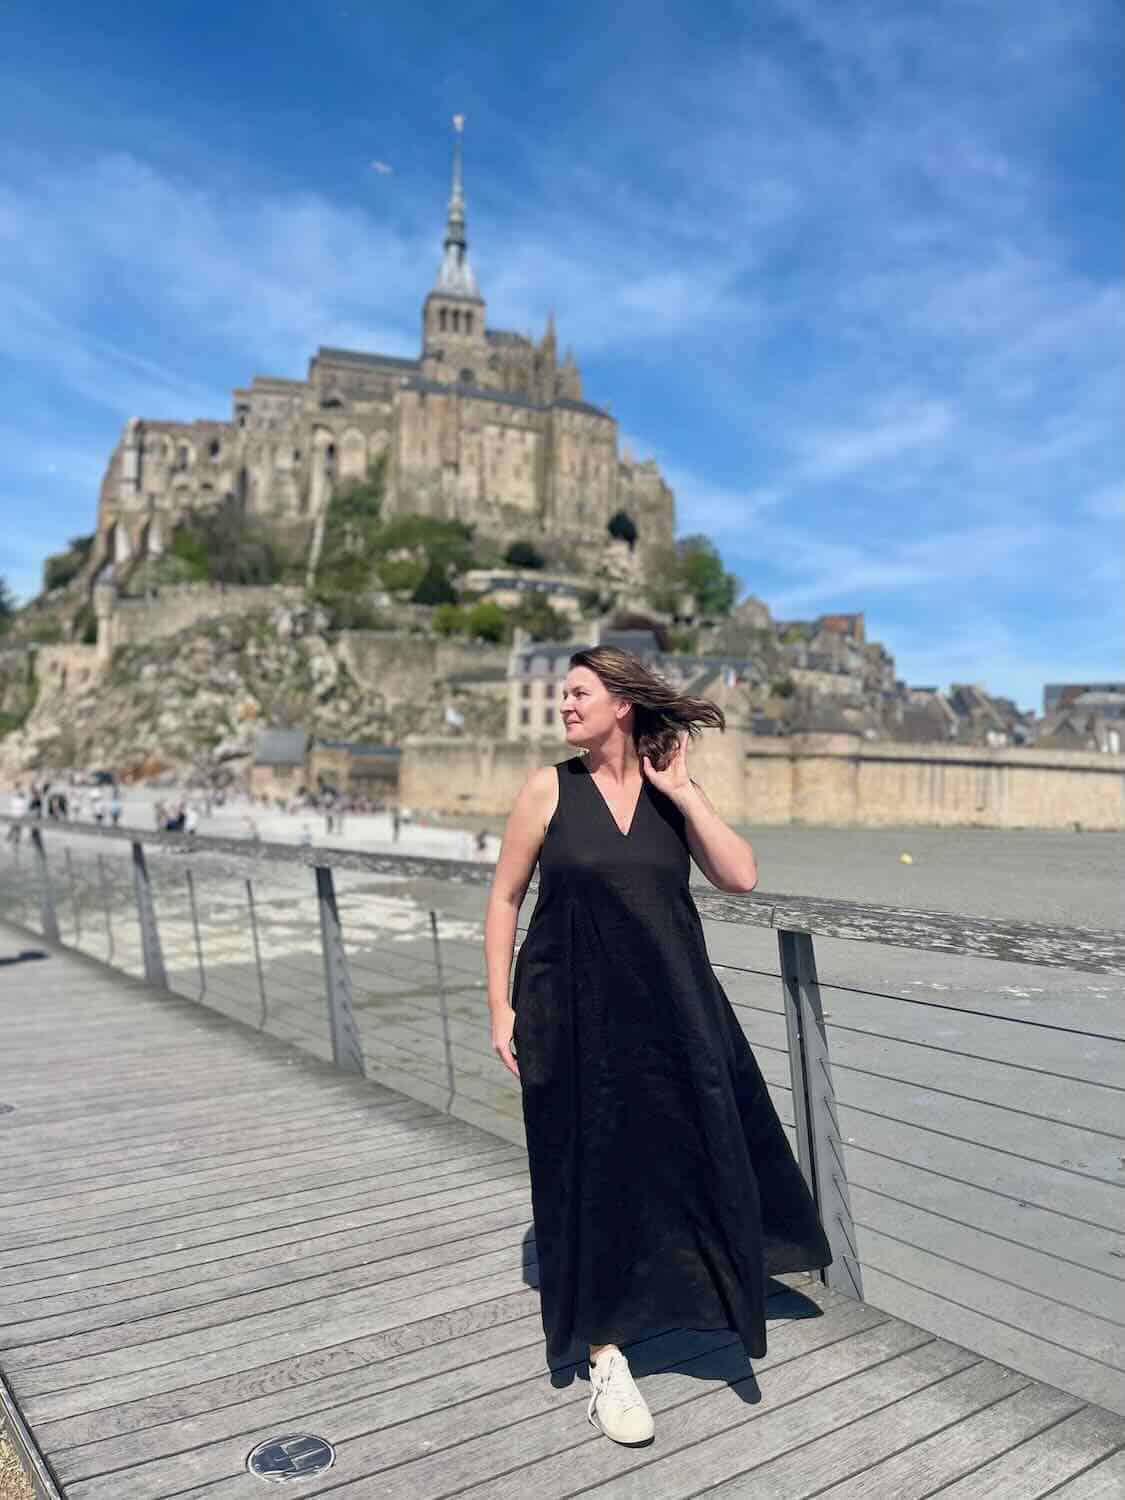 Solo female traveler standing on a wooden boardwalk with Mont Saint Michel in the background, highlighting the personal experience of visiting.